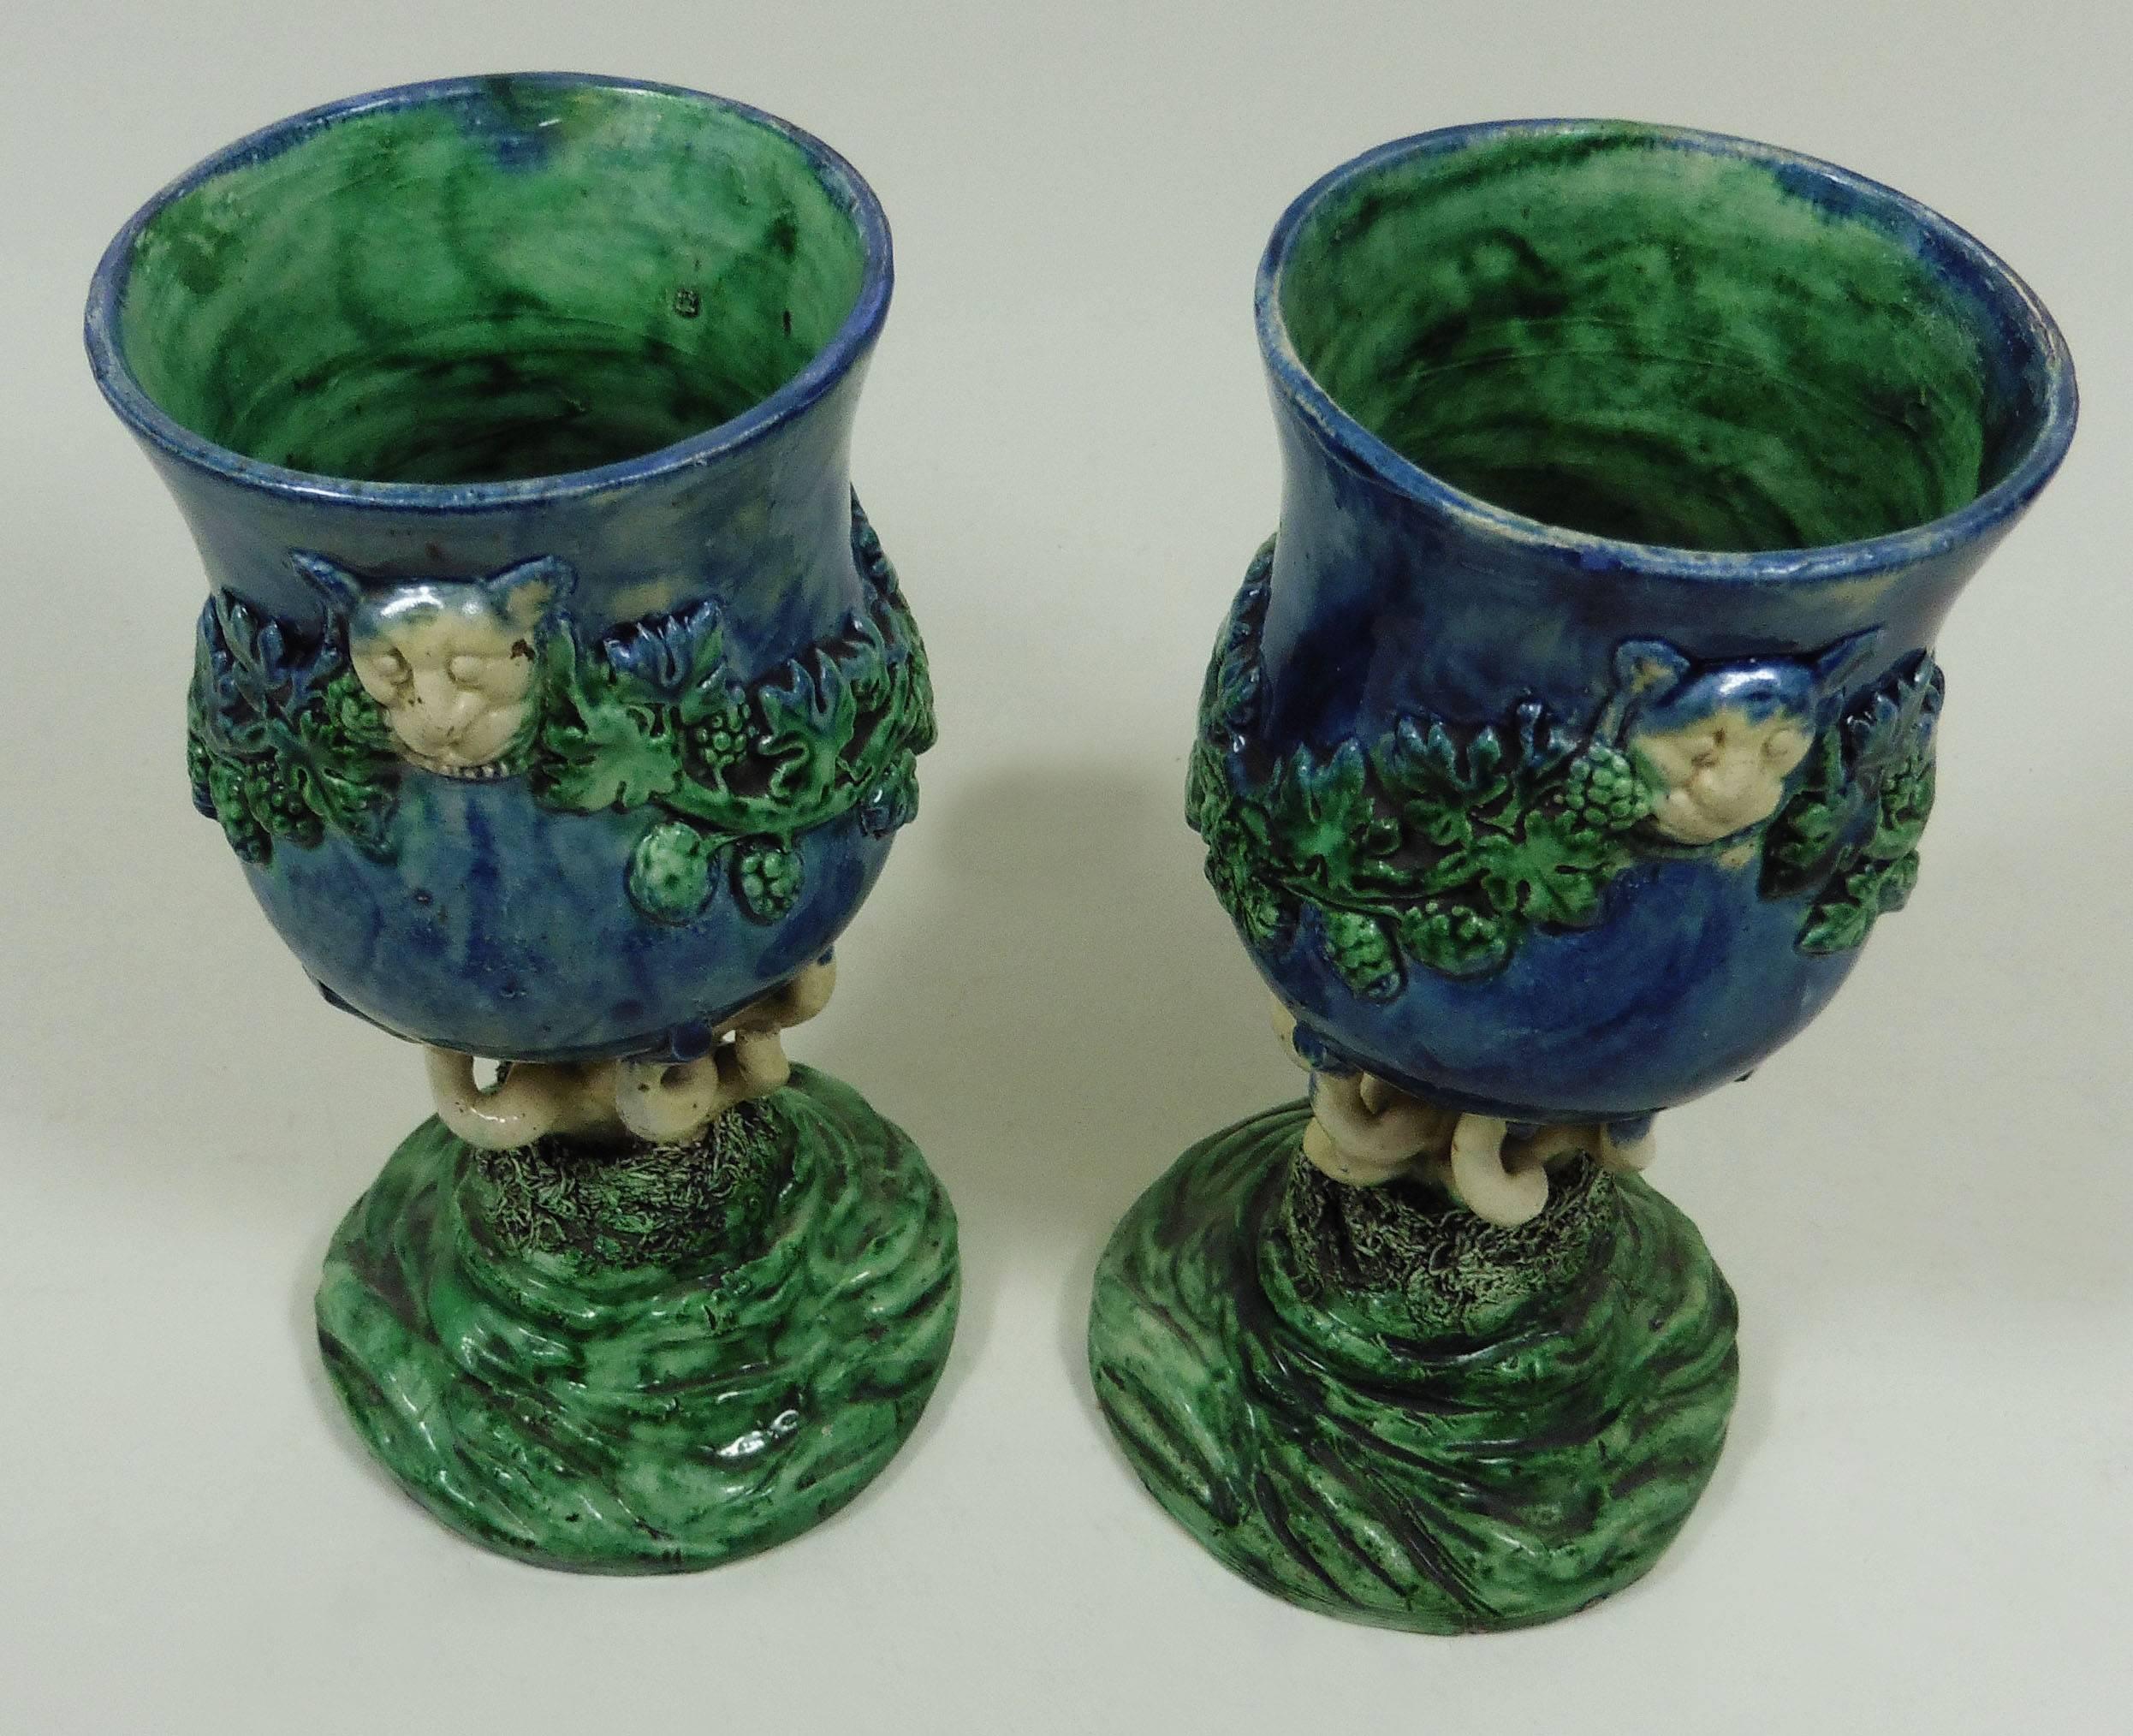 Renaissance Revival Pair of Majolica Palissy Chalices Vases with Grapes Circa 1880 For Sale